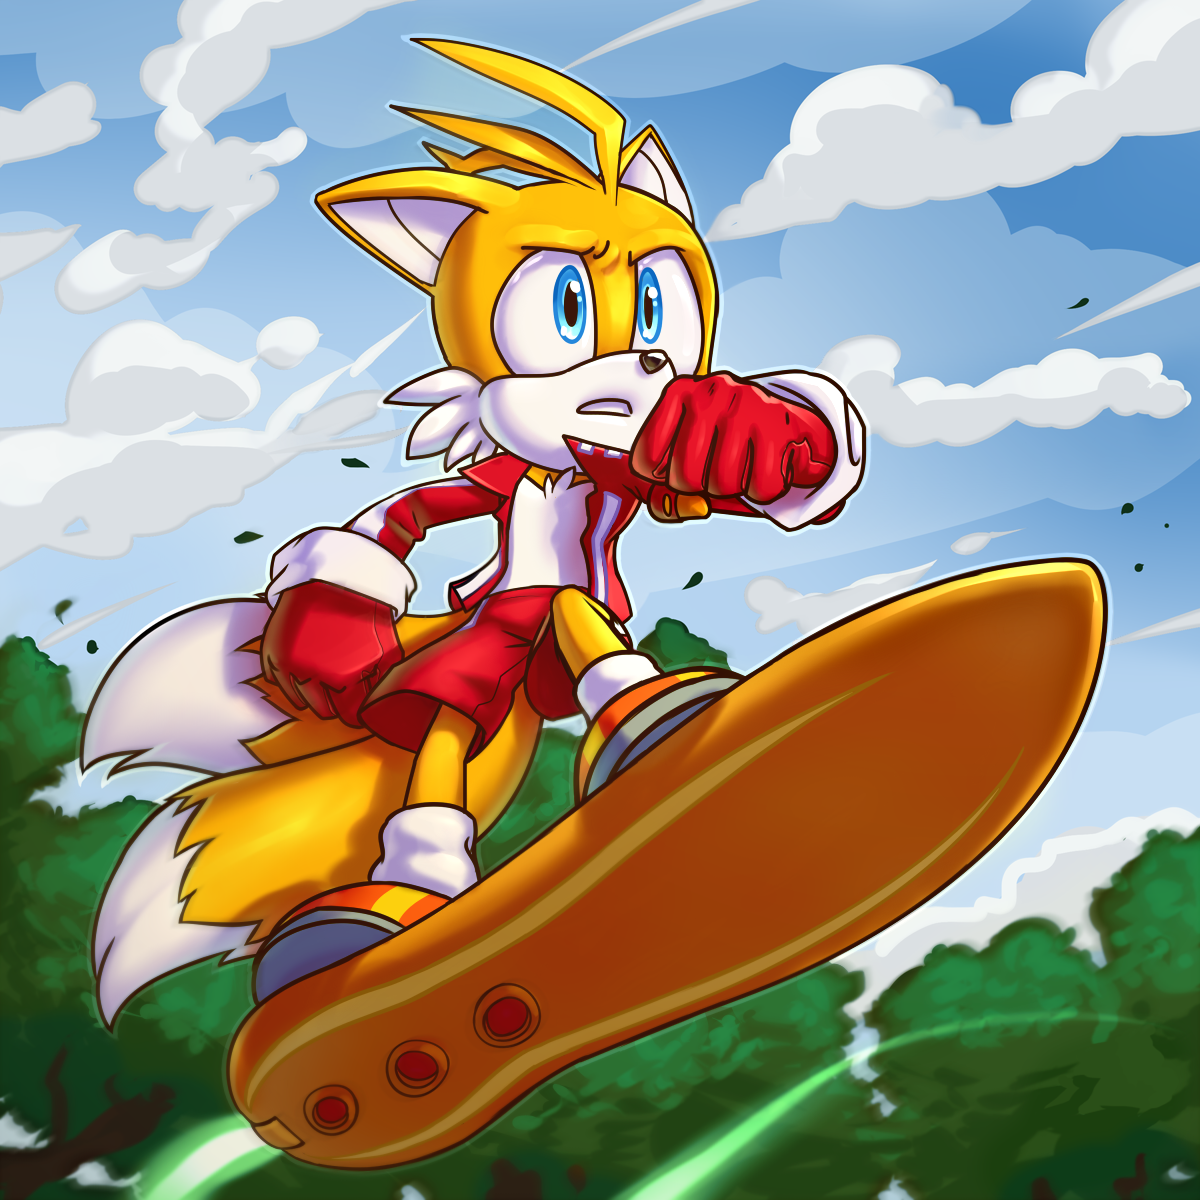 tails the fox sonic riders